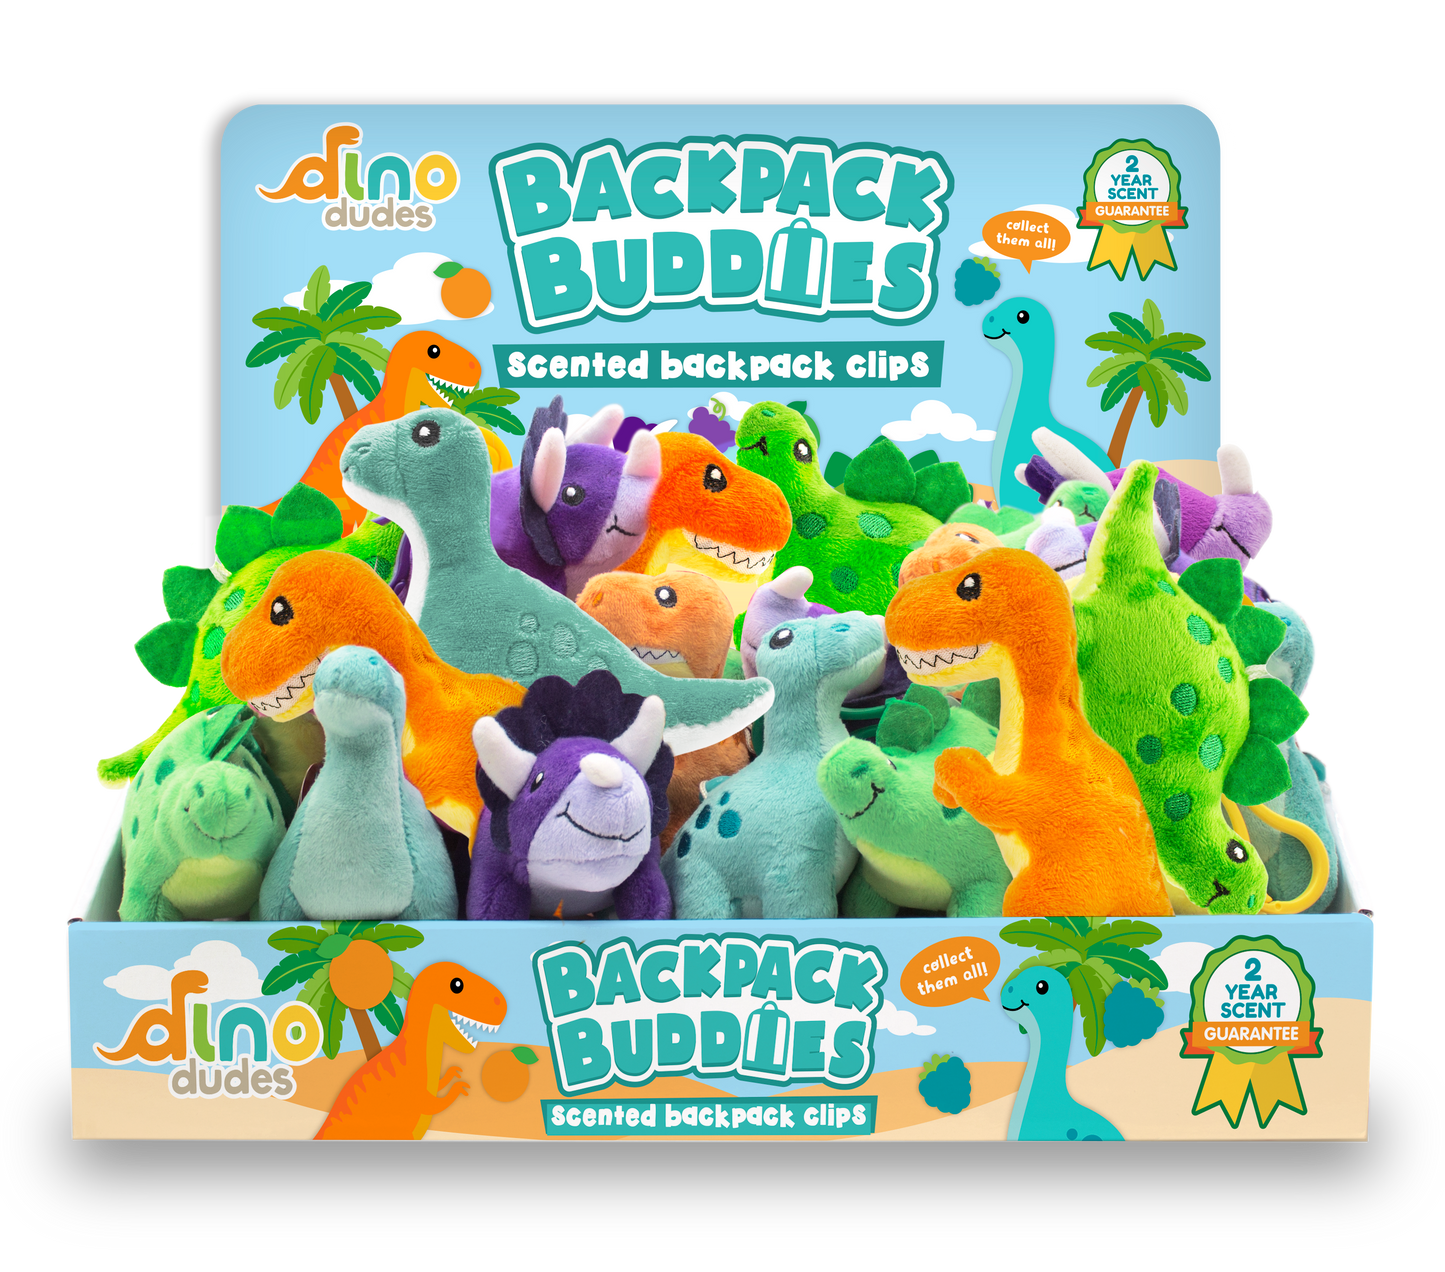 Dino Dudes Backpack Buddies (Mix-A-Case)